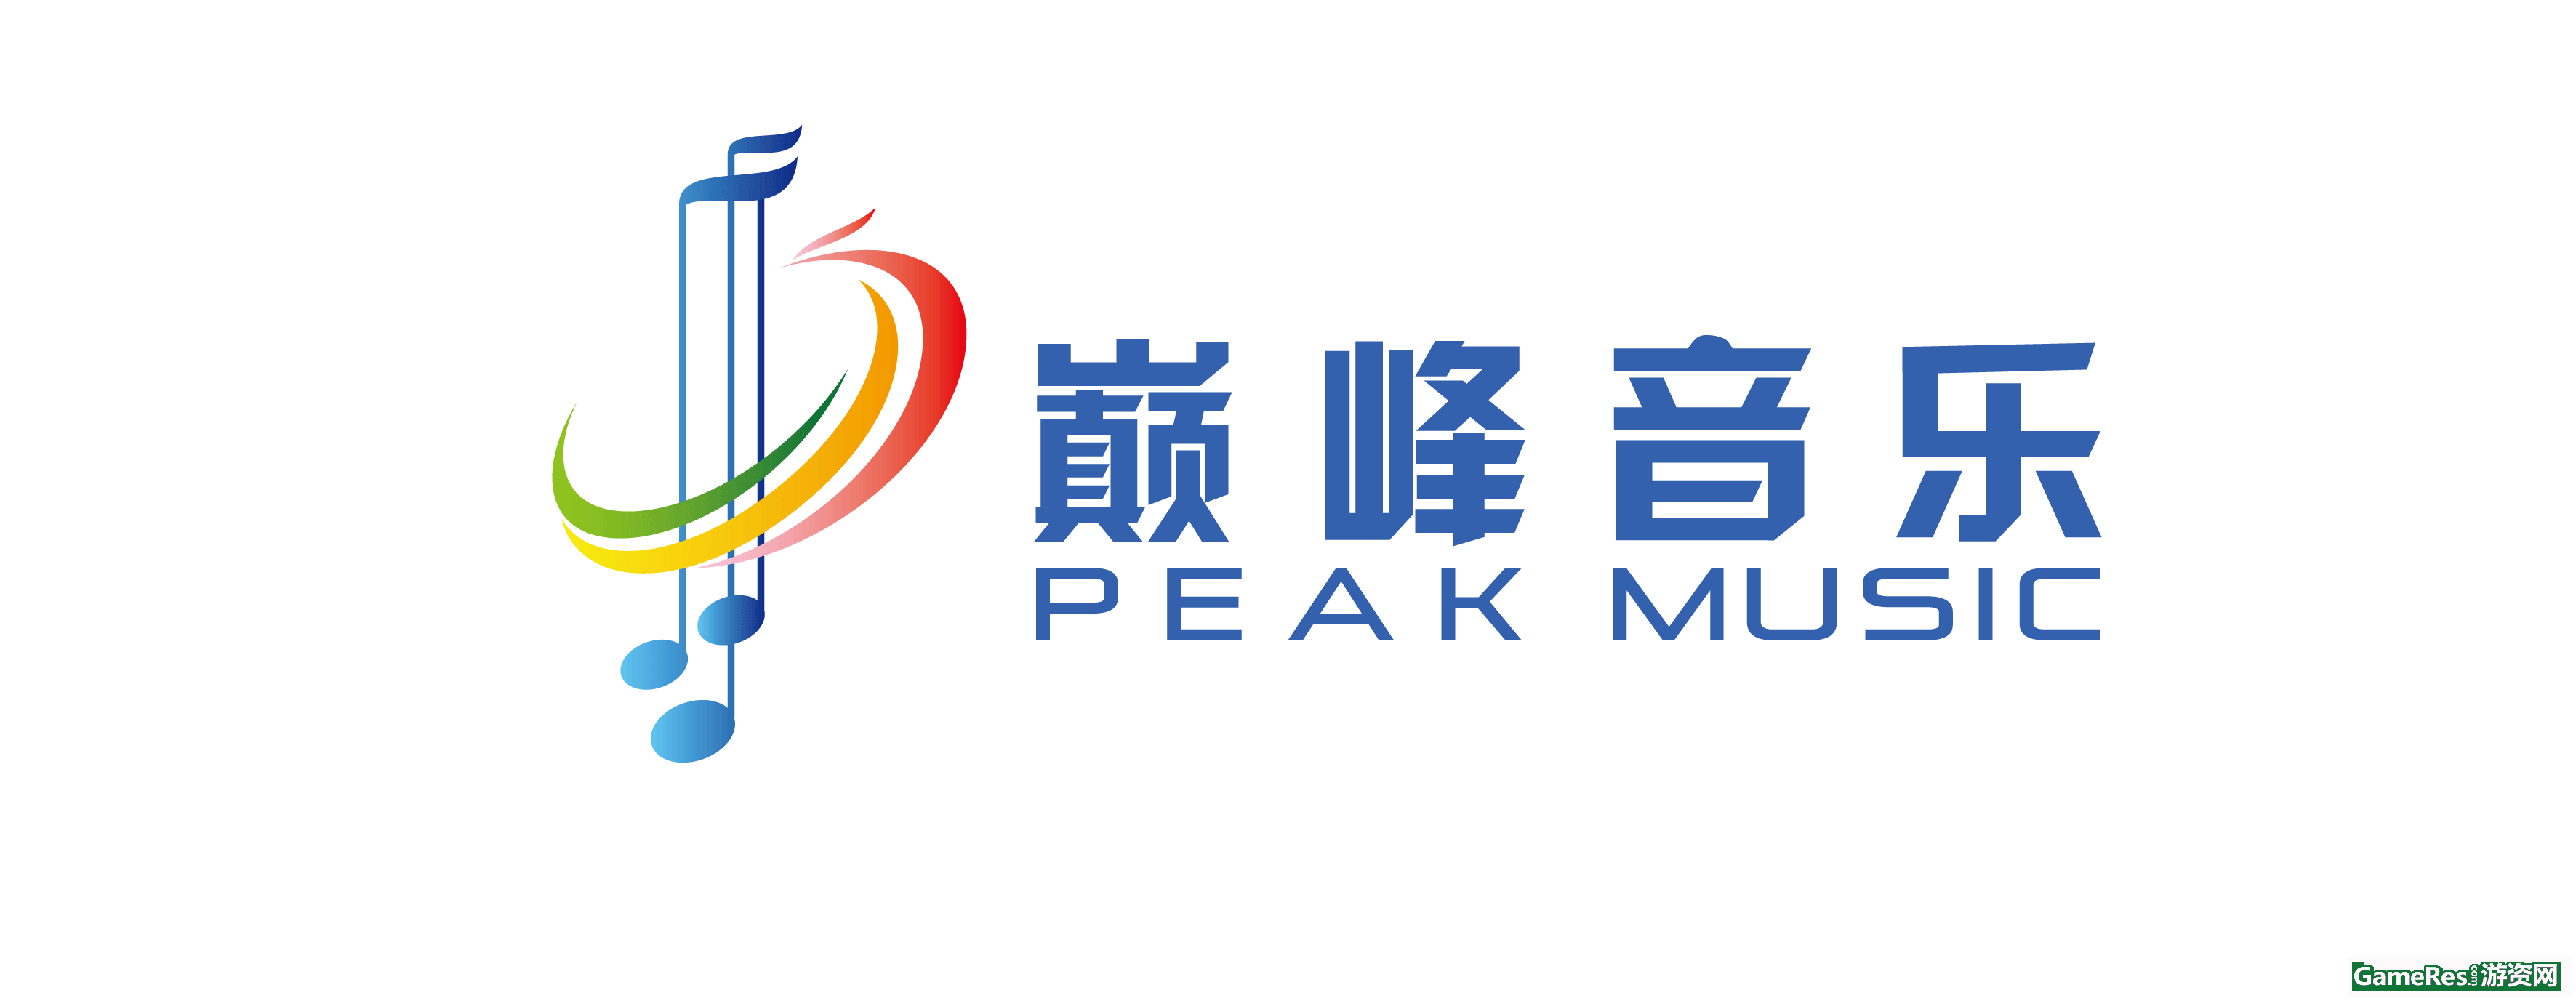 LOGO定稿---副本.png